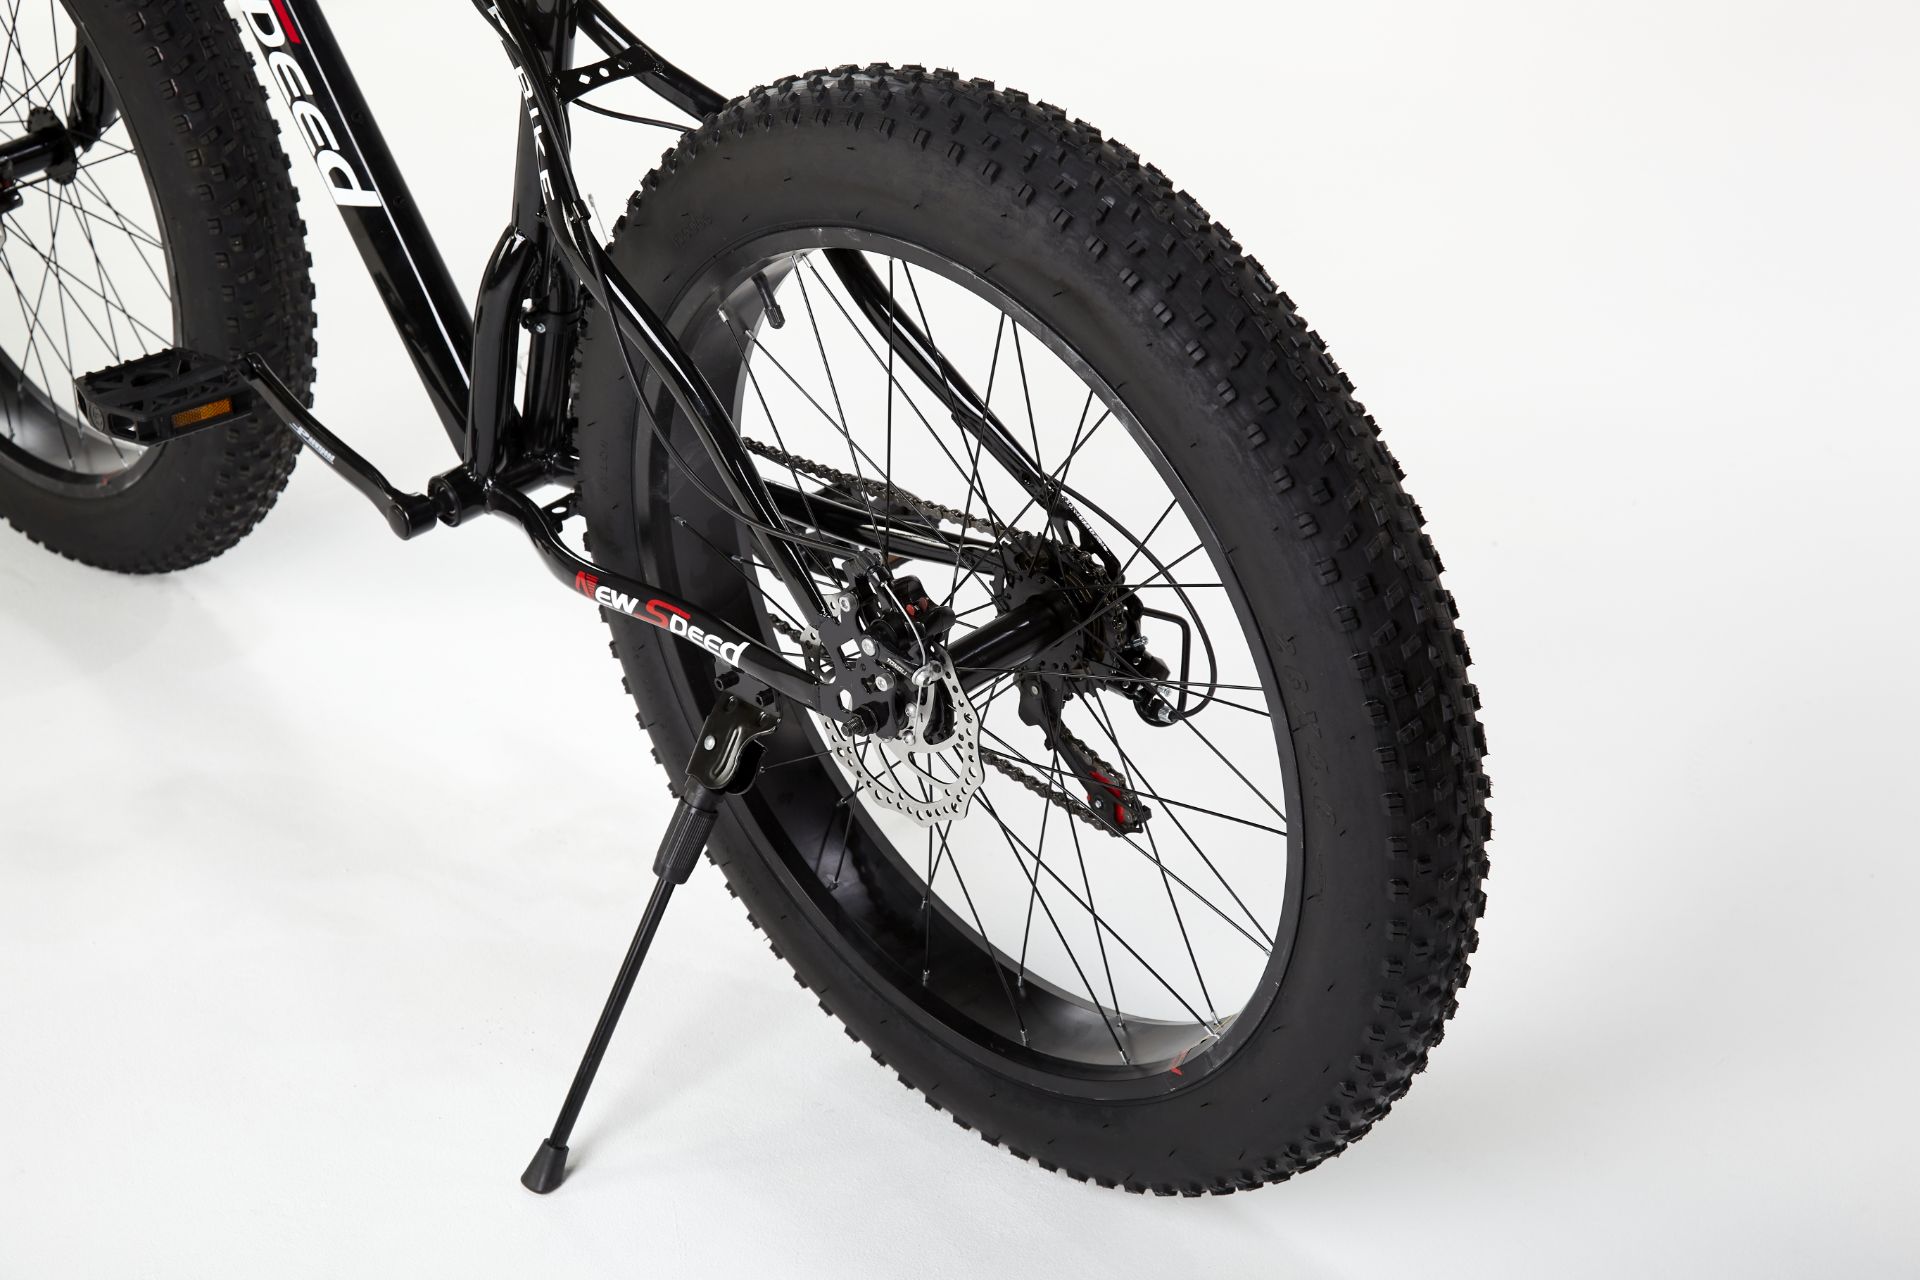 MOUNTAIN BIKE BICYCLE MEN/WOMEN FAT TIRE 26" WITH FRONT SUSPENSION - BLACK (04) - Image 4 of 12